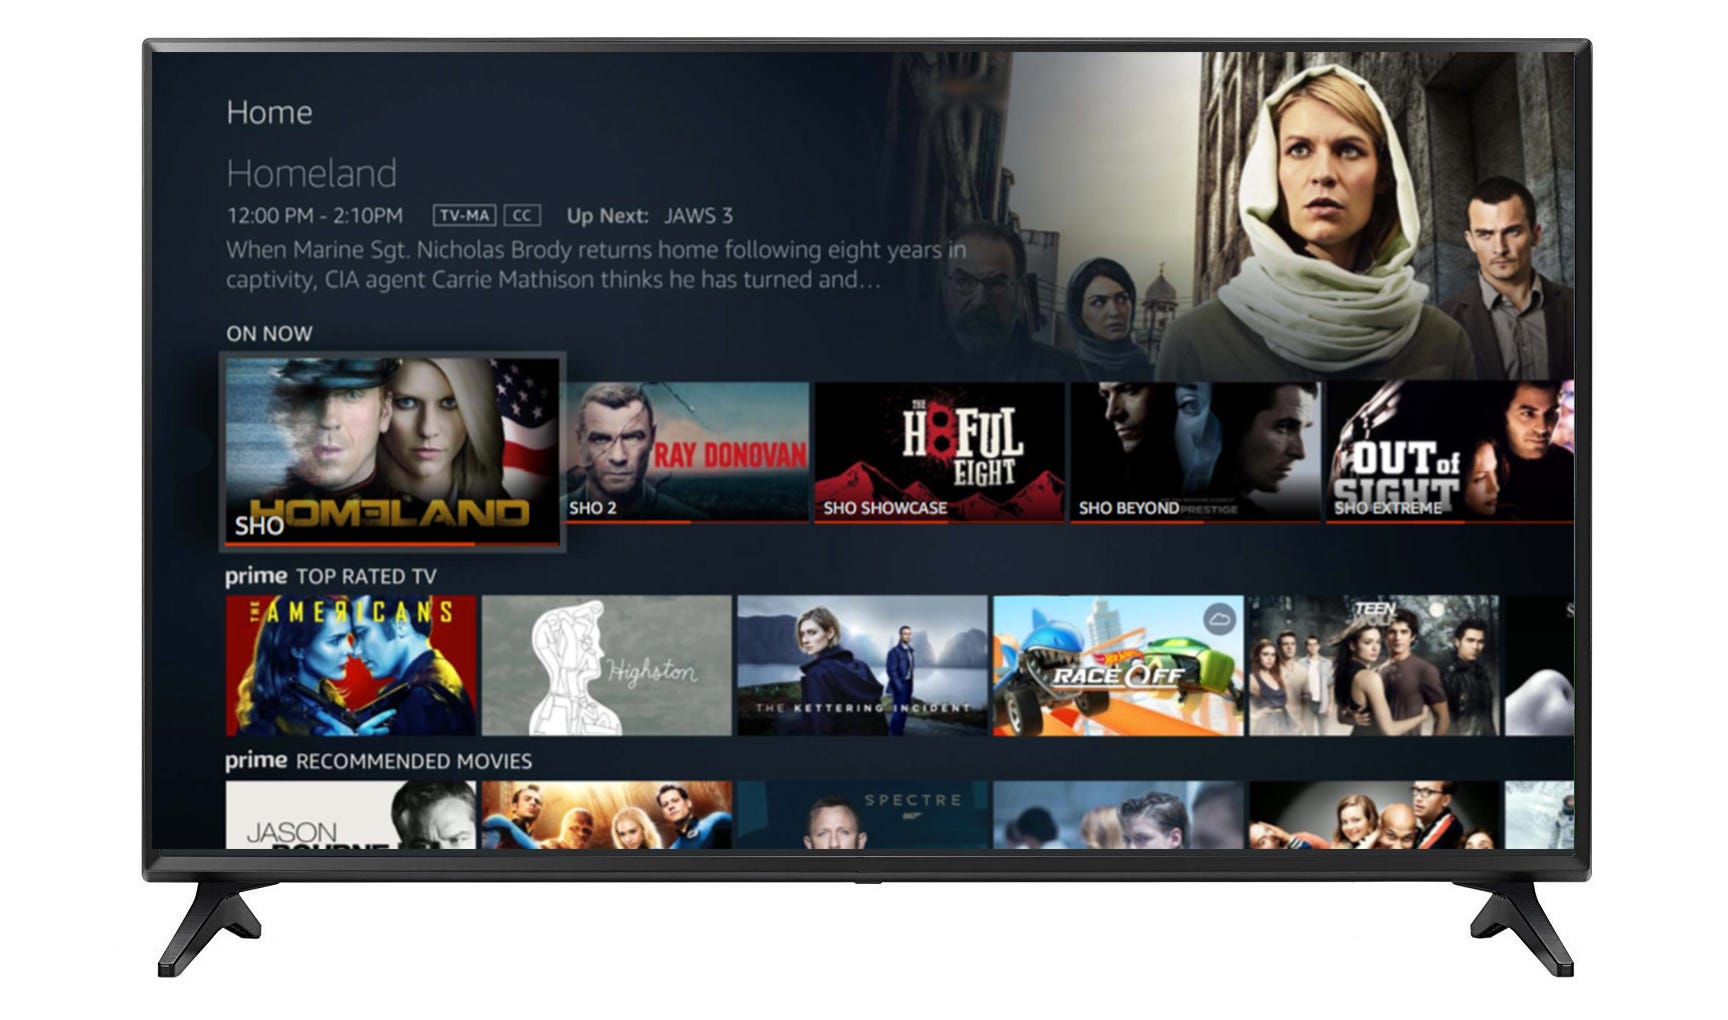 Live Tv Has A New Home On Fire Tv By Amazon Fire Tv Amazon Fire Tv